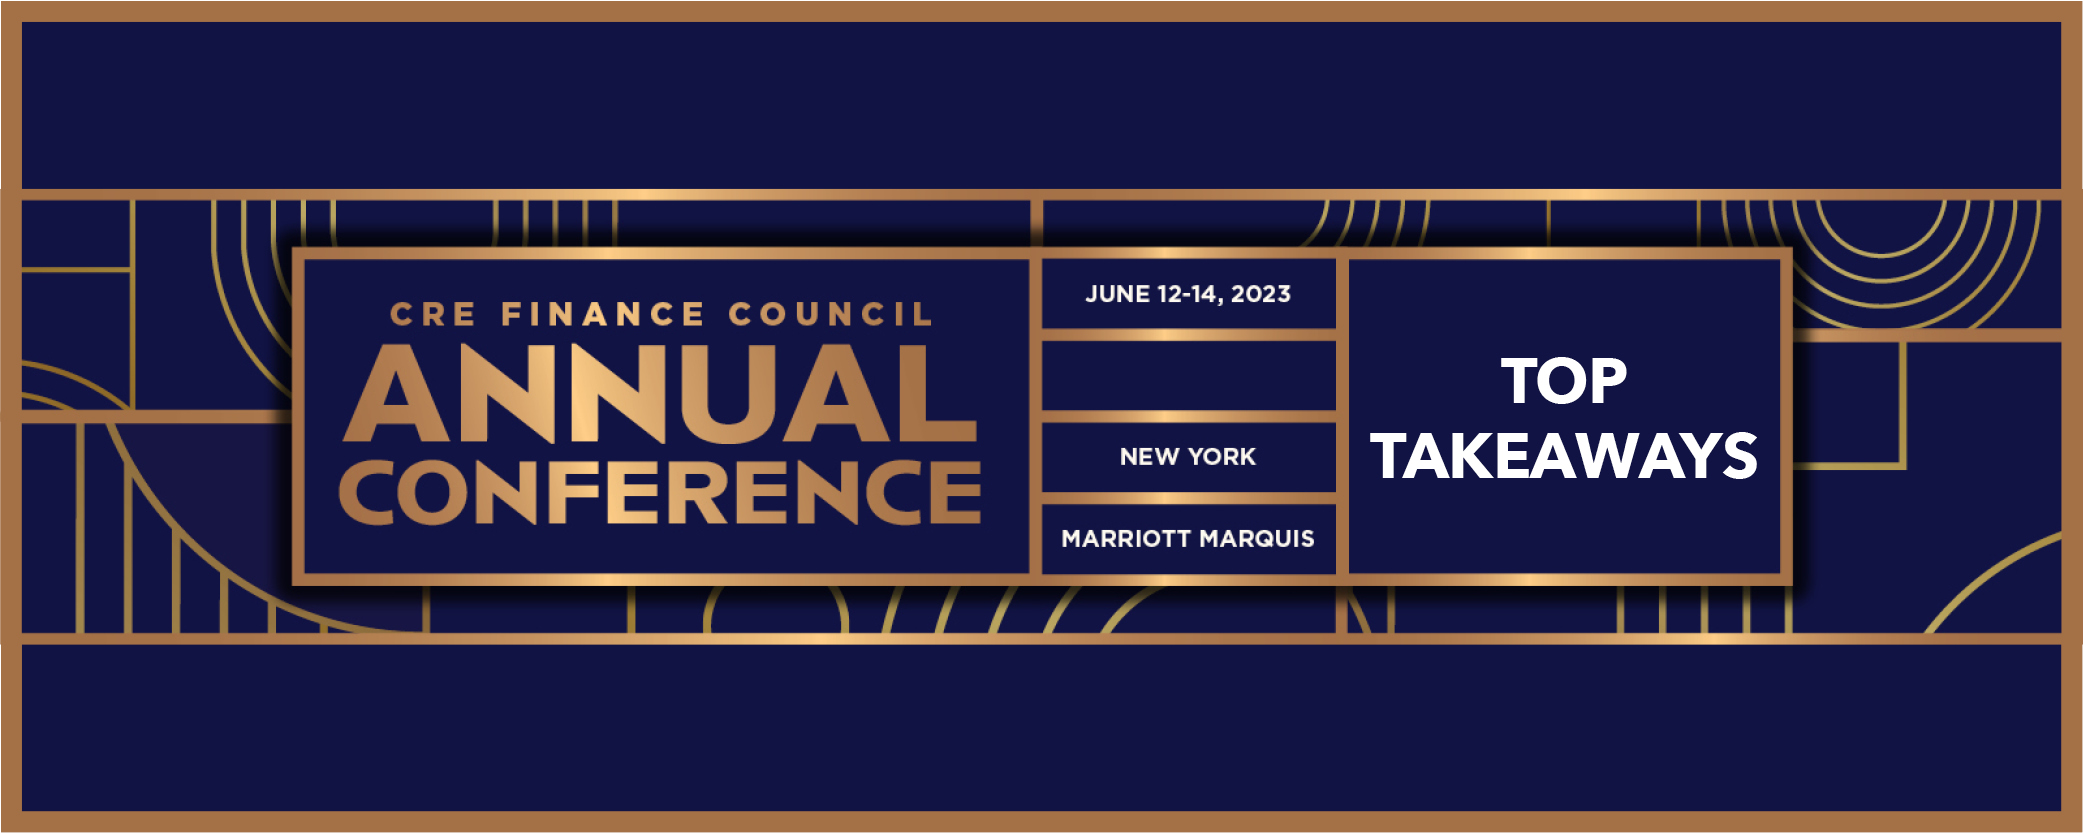 Top takeaways: cre finance council annual conference